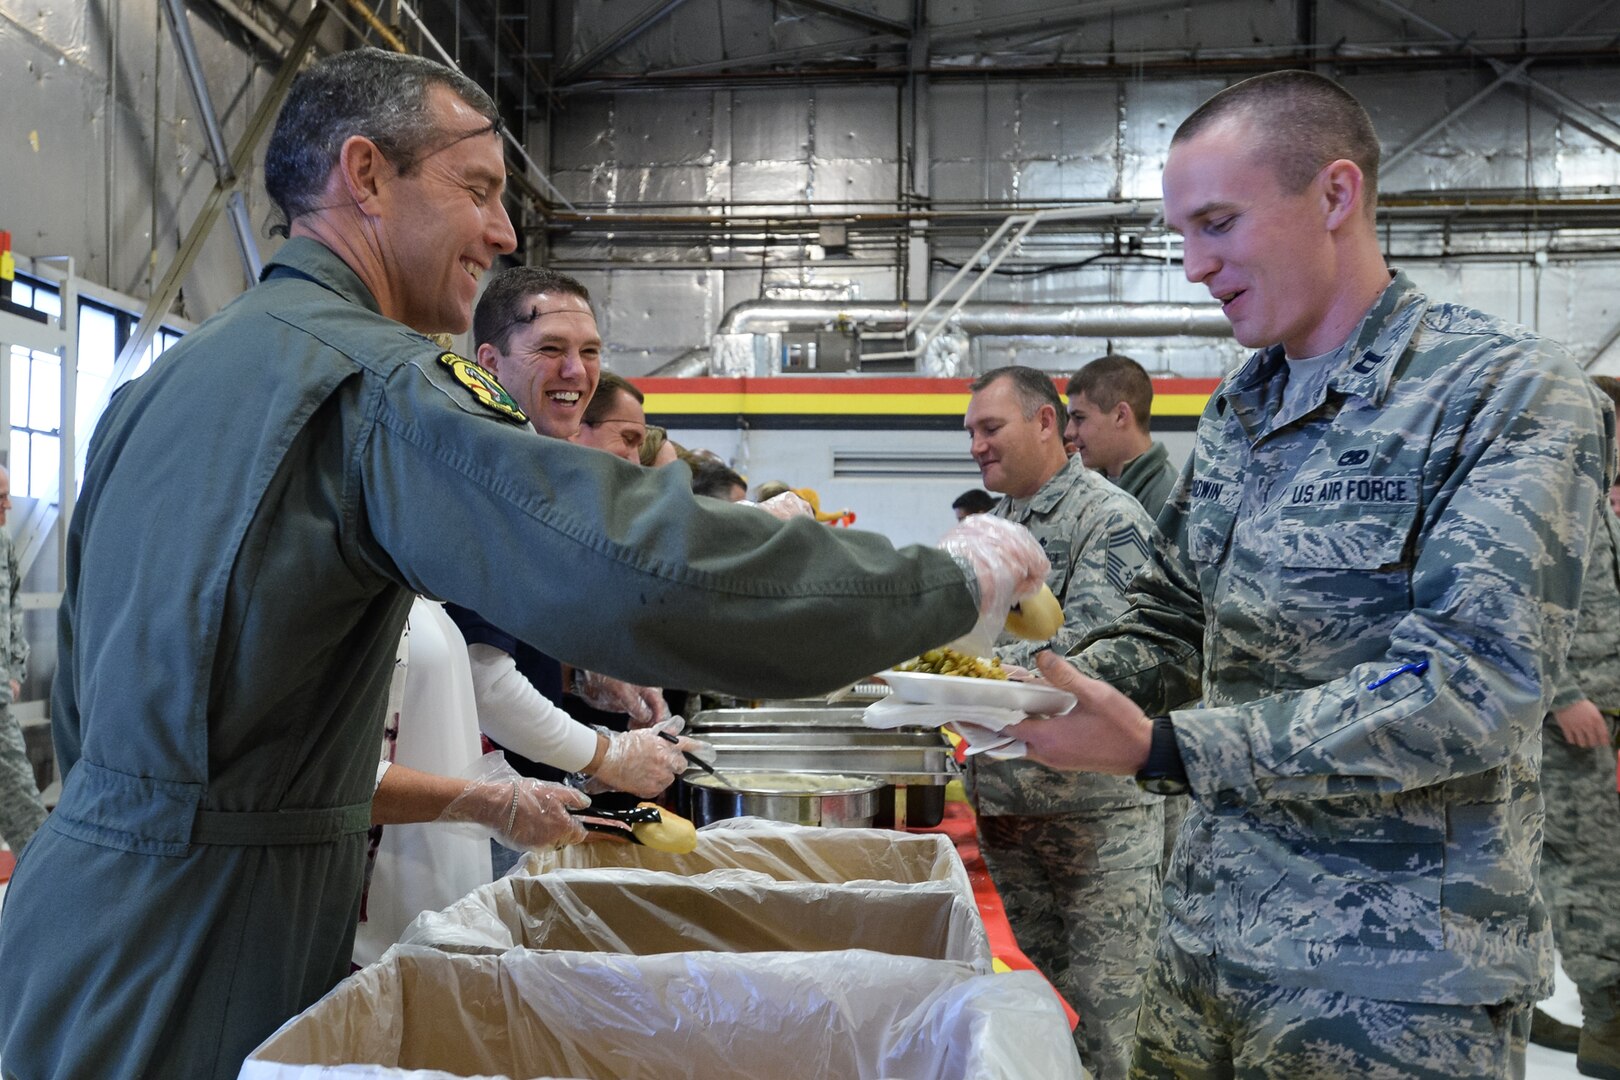 Col. David Smith (left), 419th Fighter Wing commander, helps serve a Thanksgiving meal to Airmen assigned to Hill Air Force Base's fighter wings here Nov. 24. With help from the local community, hundreds of Airmen in the 419th FW and active-duty 388th FW feasted together in celebration of the holiday. (U.S. Air Force photo/R. Nial Bradshaw) 